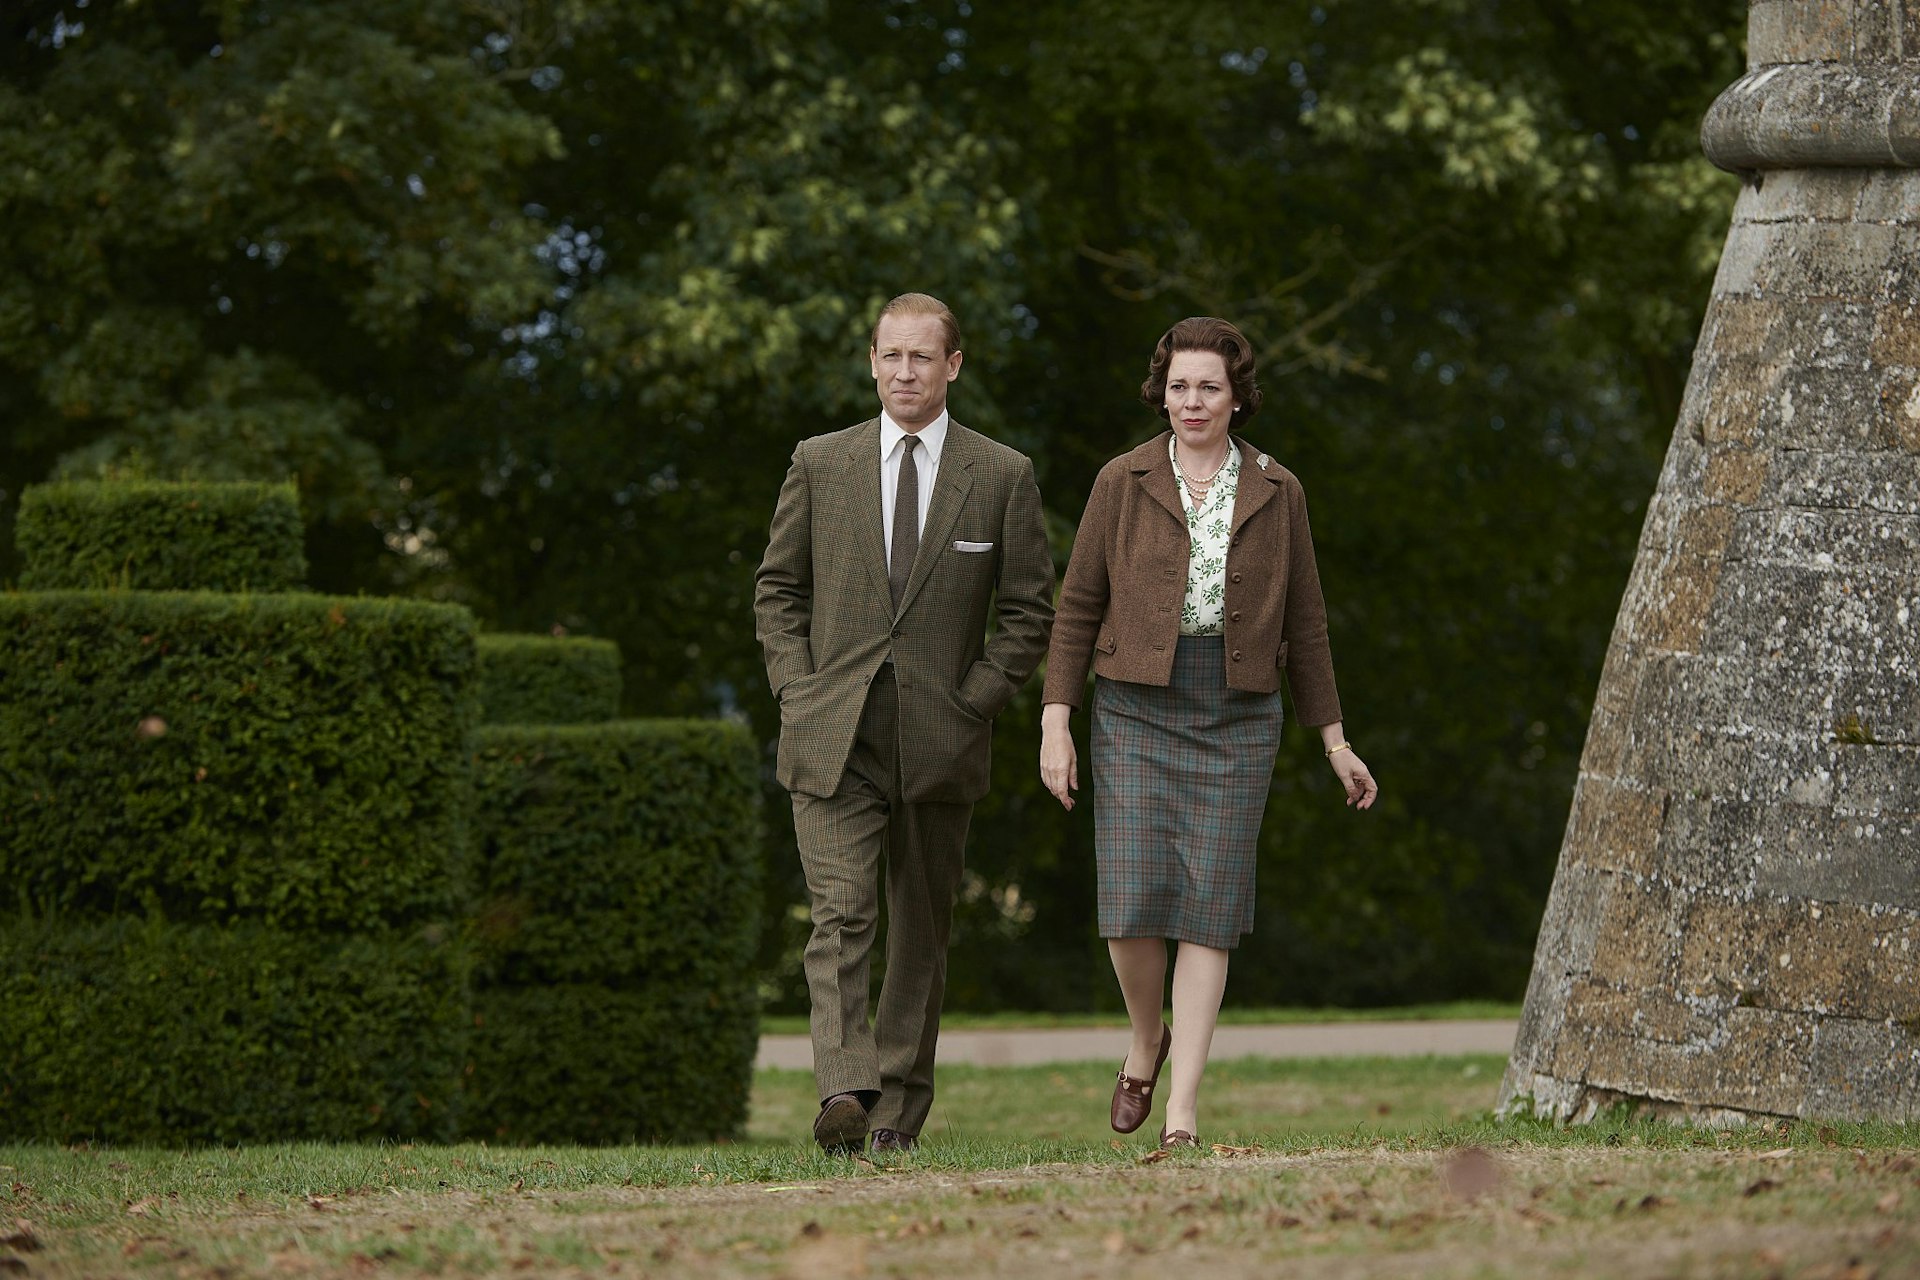 A still from The Crown season 3; it shows the Queen (Olivia Colman) and Prince Philip (Tobias Menzies) walking in the grounds of Belvoir Castle.